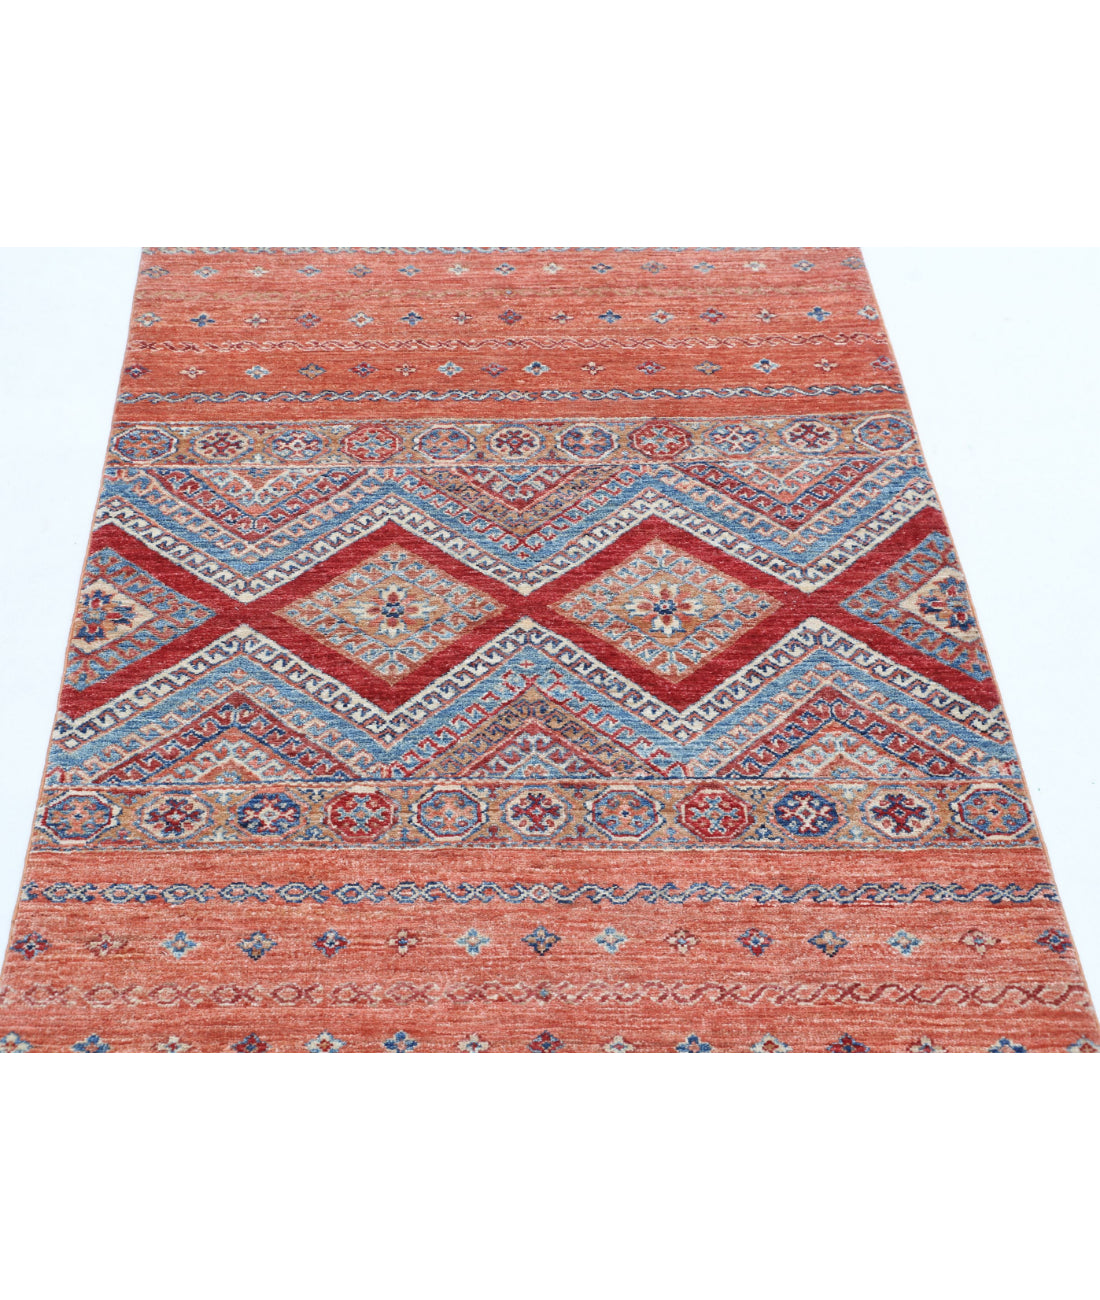 Hand Knotted Khurjeen Wool Rug - 3'4'' x 4'9'' 3'4'' x 4'9'' (100 X 143) / Multi / Multi